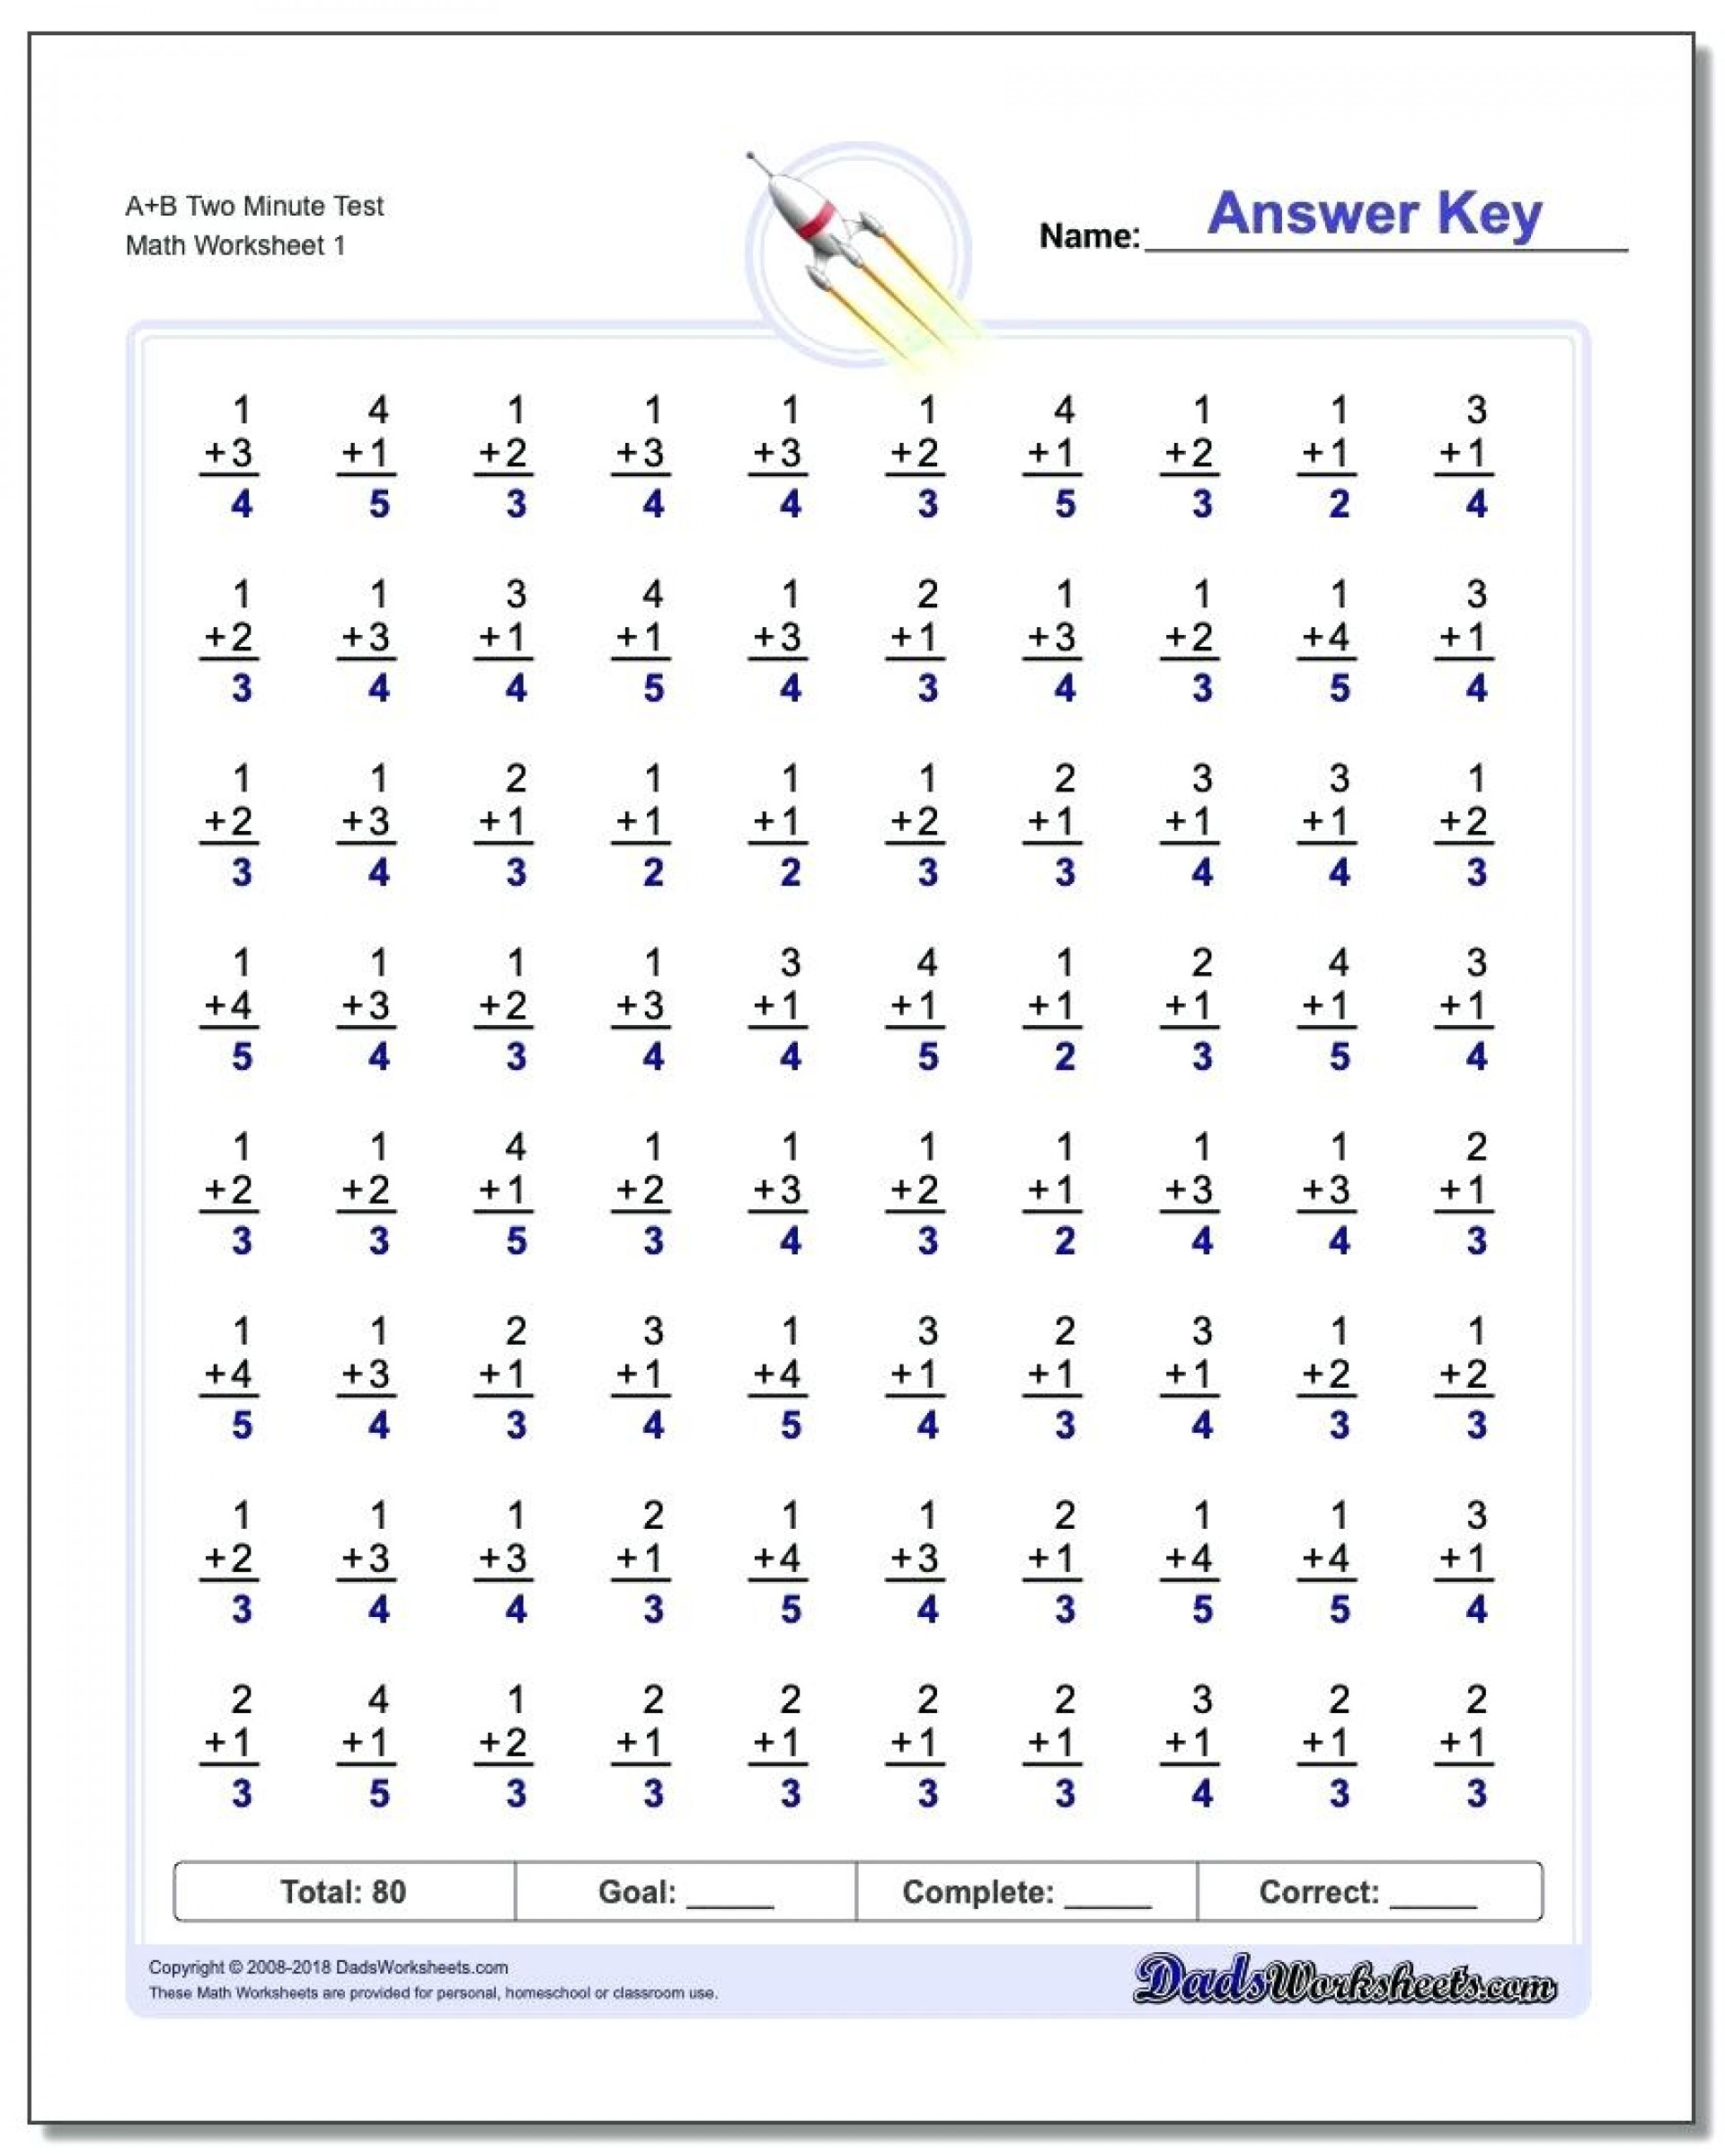 Jest For Fun Math Worksheet Answers 15 10 | Printable with Multiplication Worksheets Homeschool